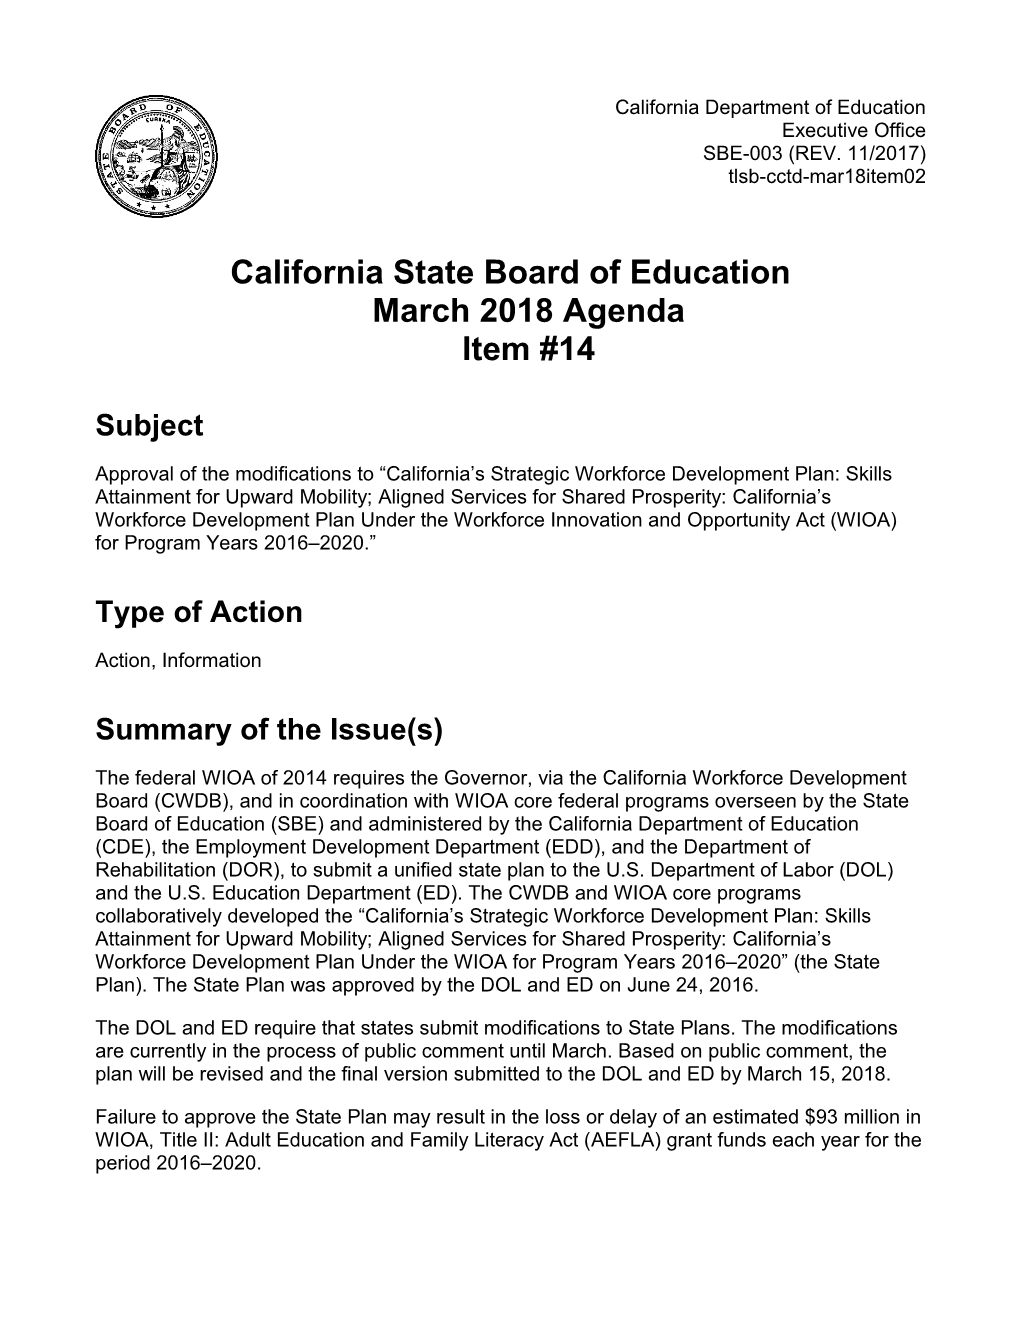 March 2018 Agenda Item 14 - Meeting Agendas (CA State Board of Education)